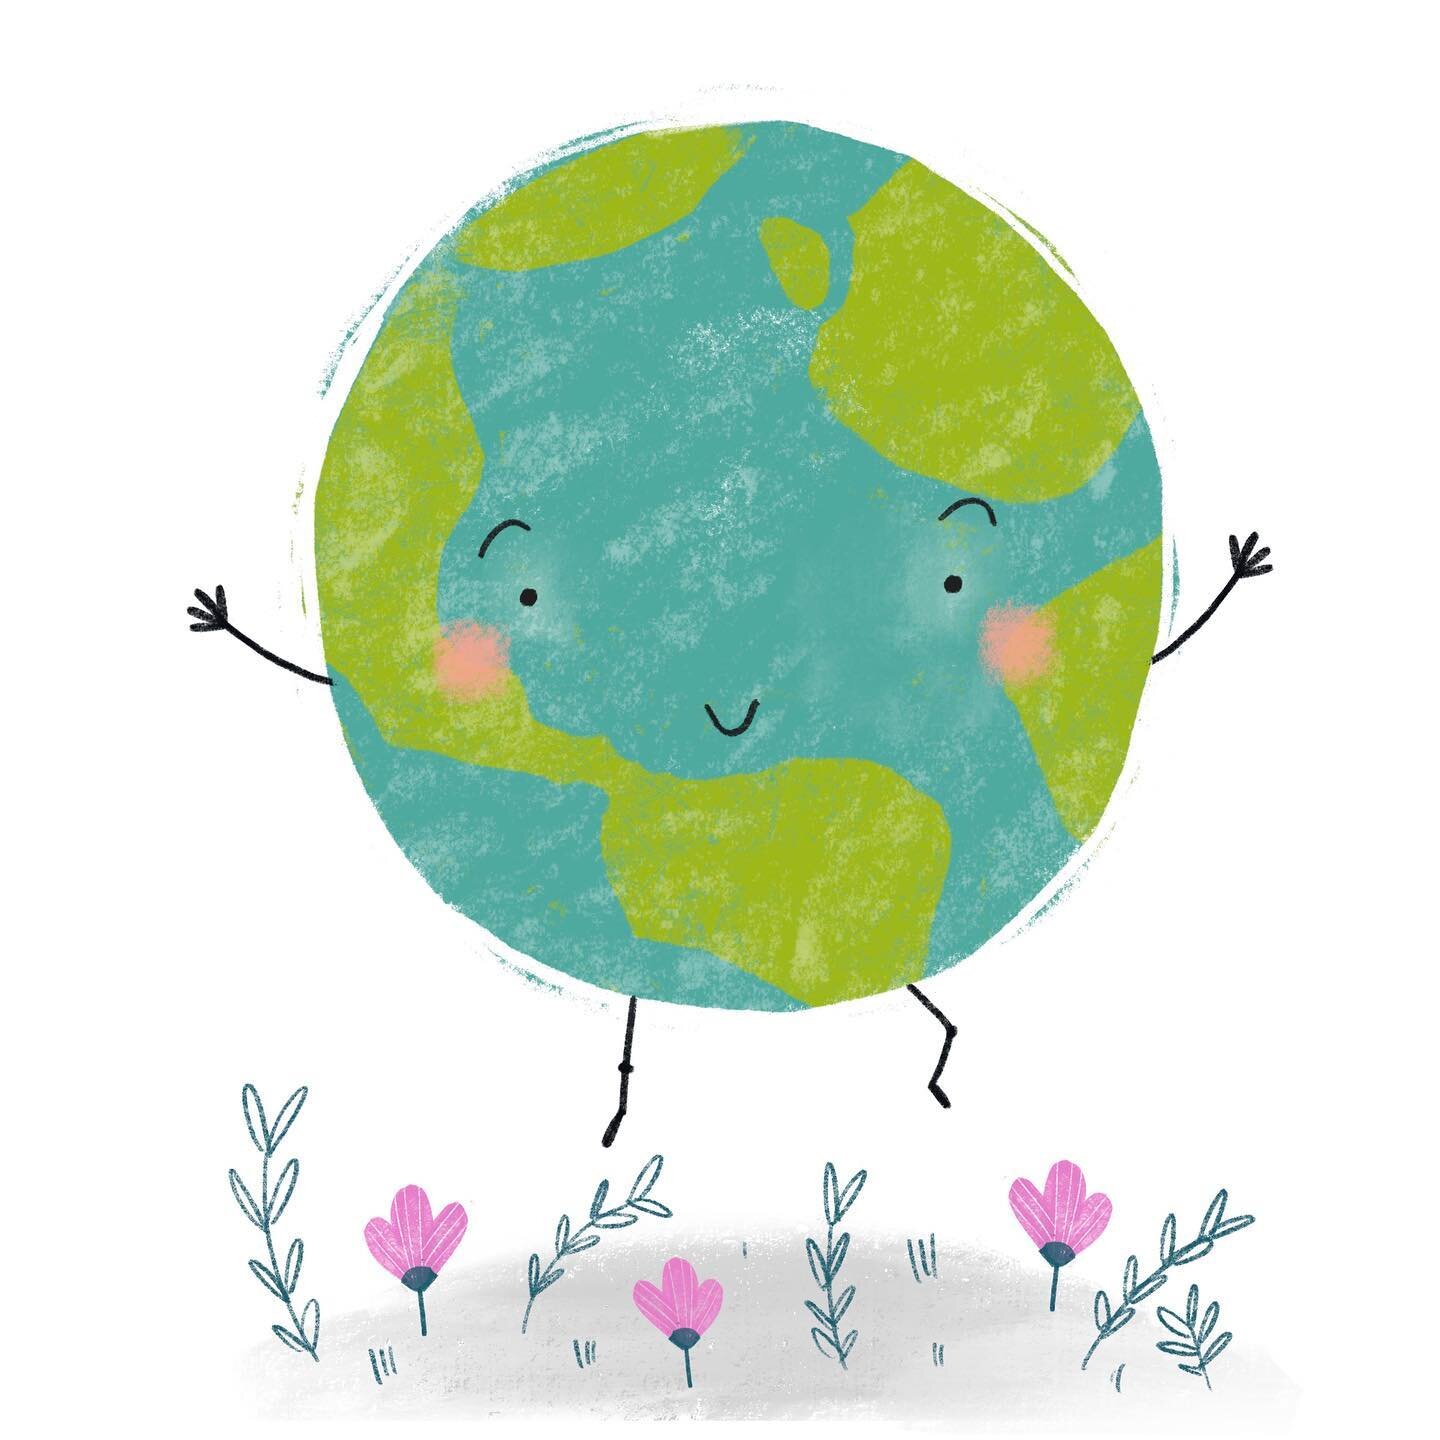 🌱A quick one for Earth Day. Let&rsquo;s take good care of it, yea? #earthdayeveryday 🌱

#ourplanetweek #onetreeplanted #letsdrawthechange #earthday #earthday2022 @ourplanetweek @onetreeplanted #natureillustration #kidlitart #kidlitillustration #non